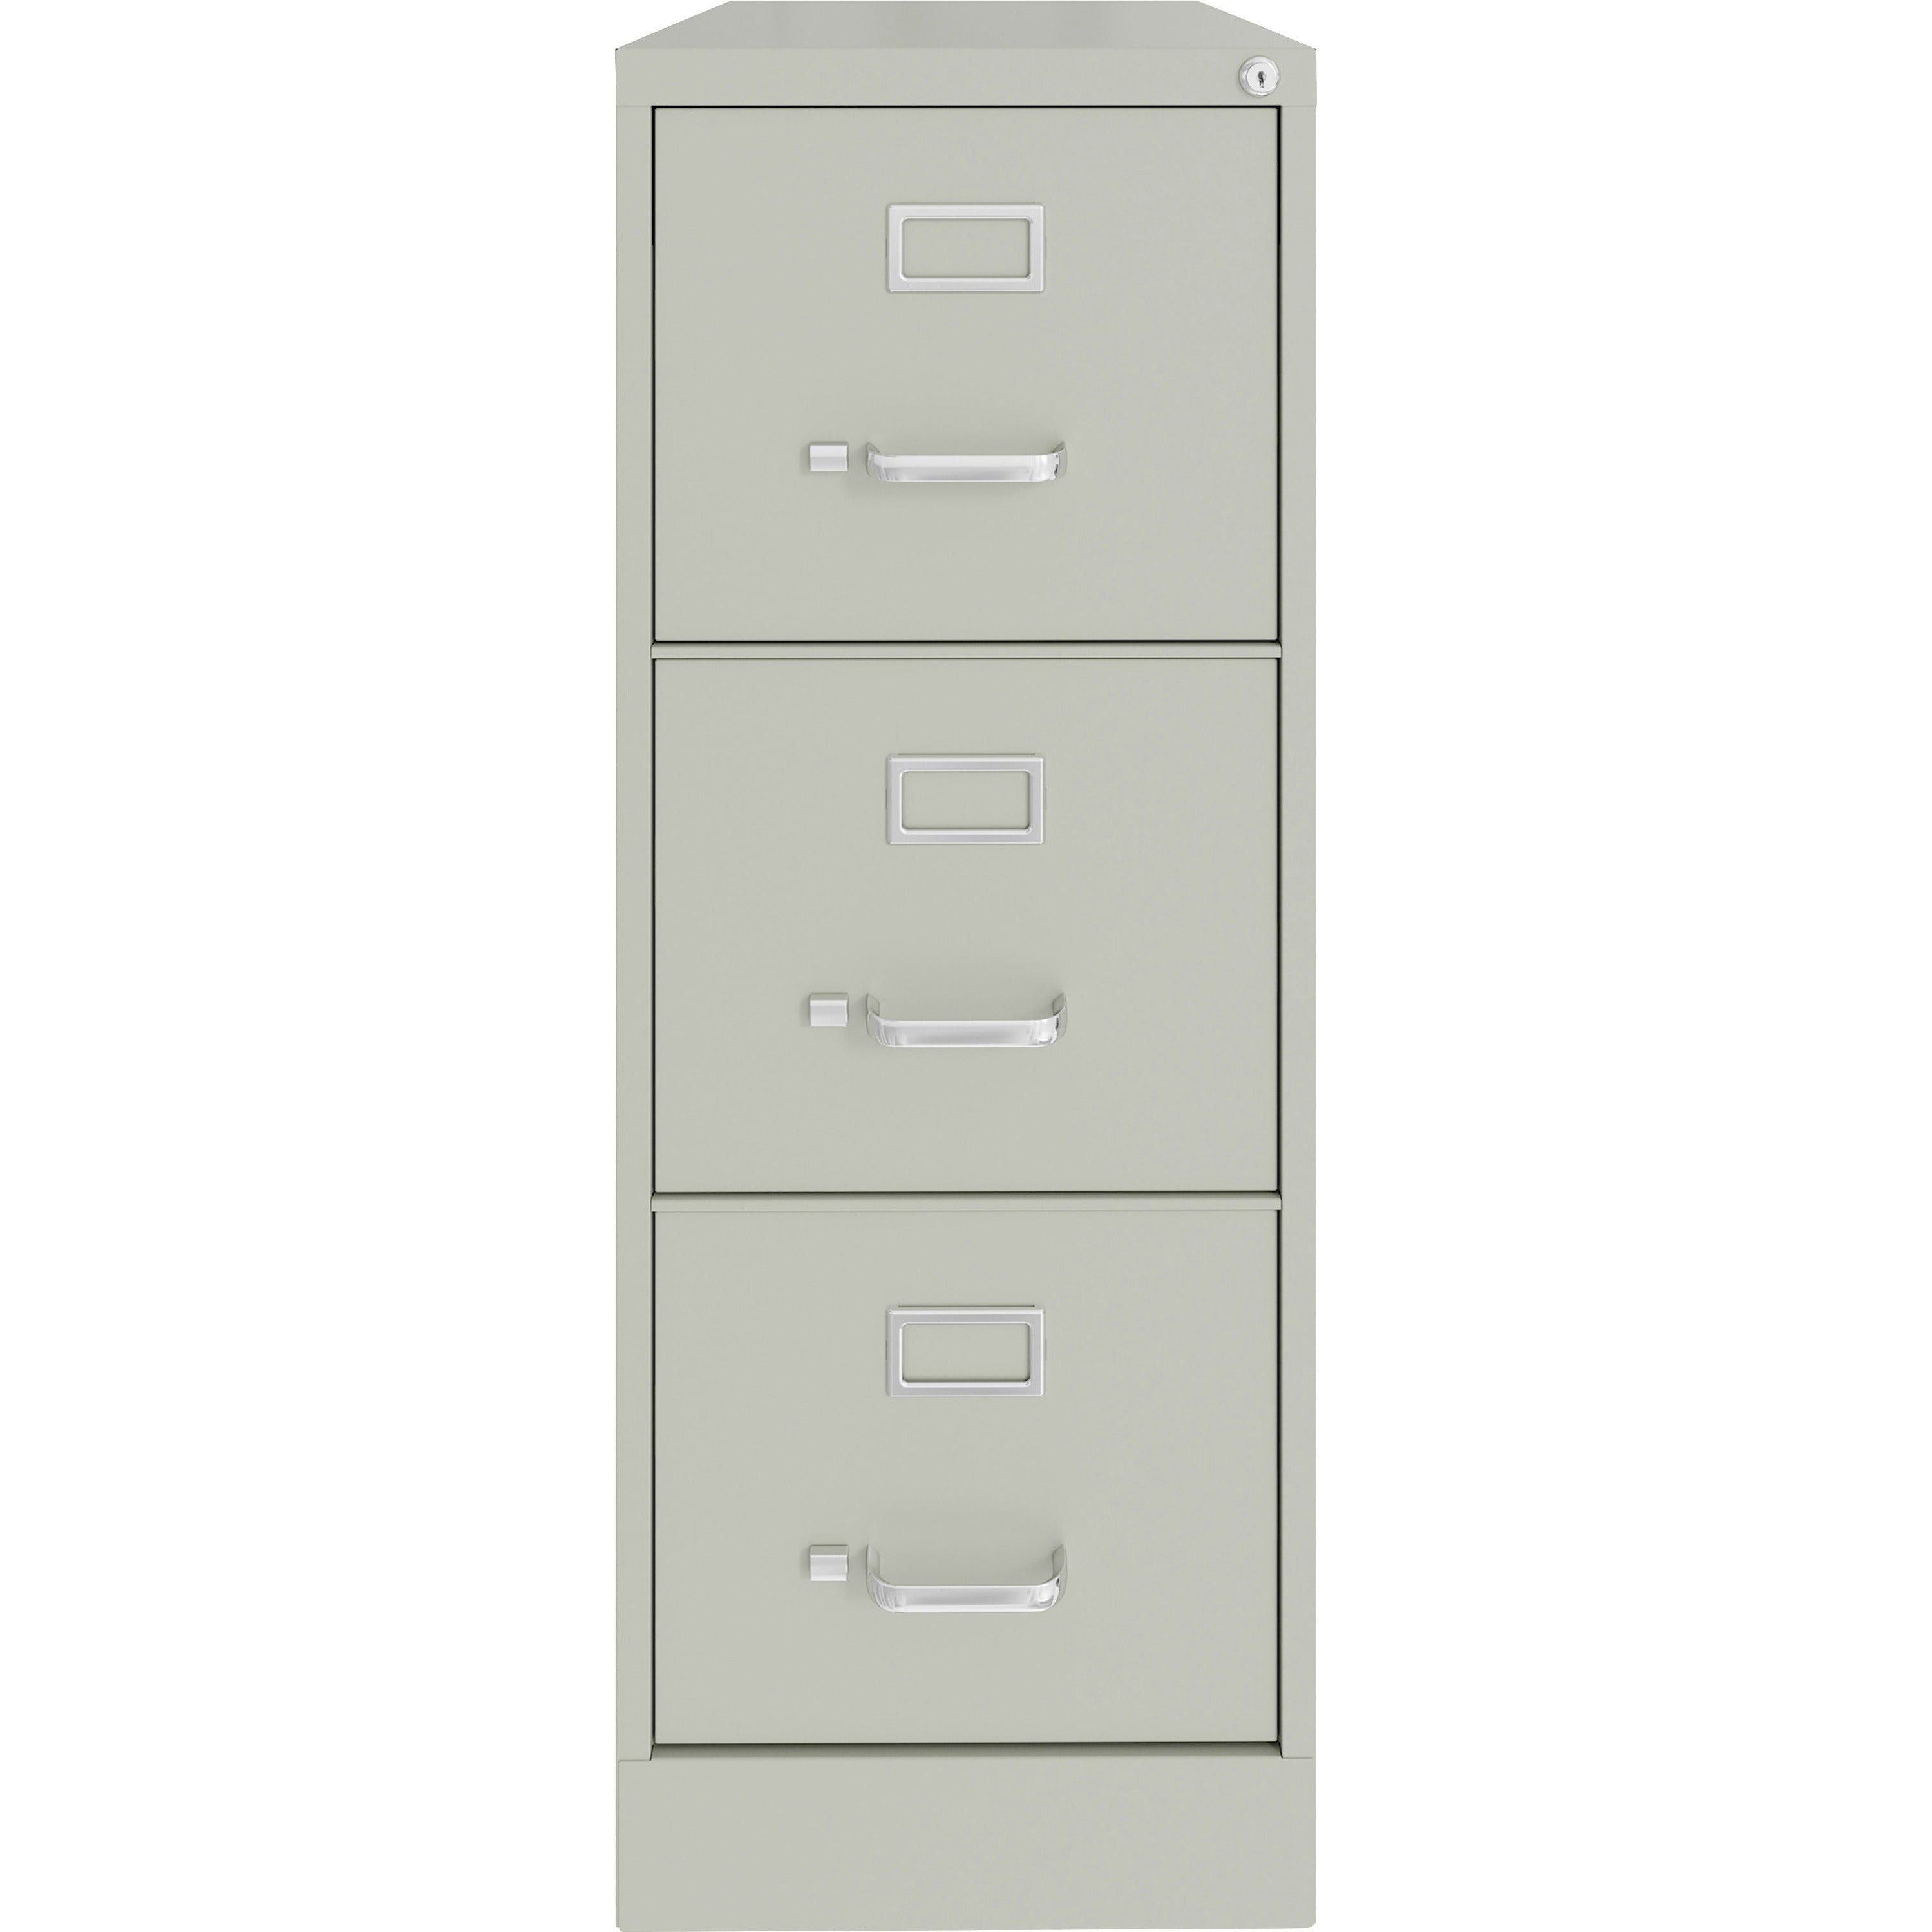 lorell-fortress-series-22-commercial-grade-vertical-file-cabinet-15-x-22-x-402-3-x-drawers-for-file-letter-vertical-ball-bearing-suspension-removable-lock-pull-handle-wire-management-light-gray-steel-recycled_llr42298 - 2